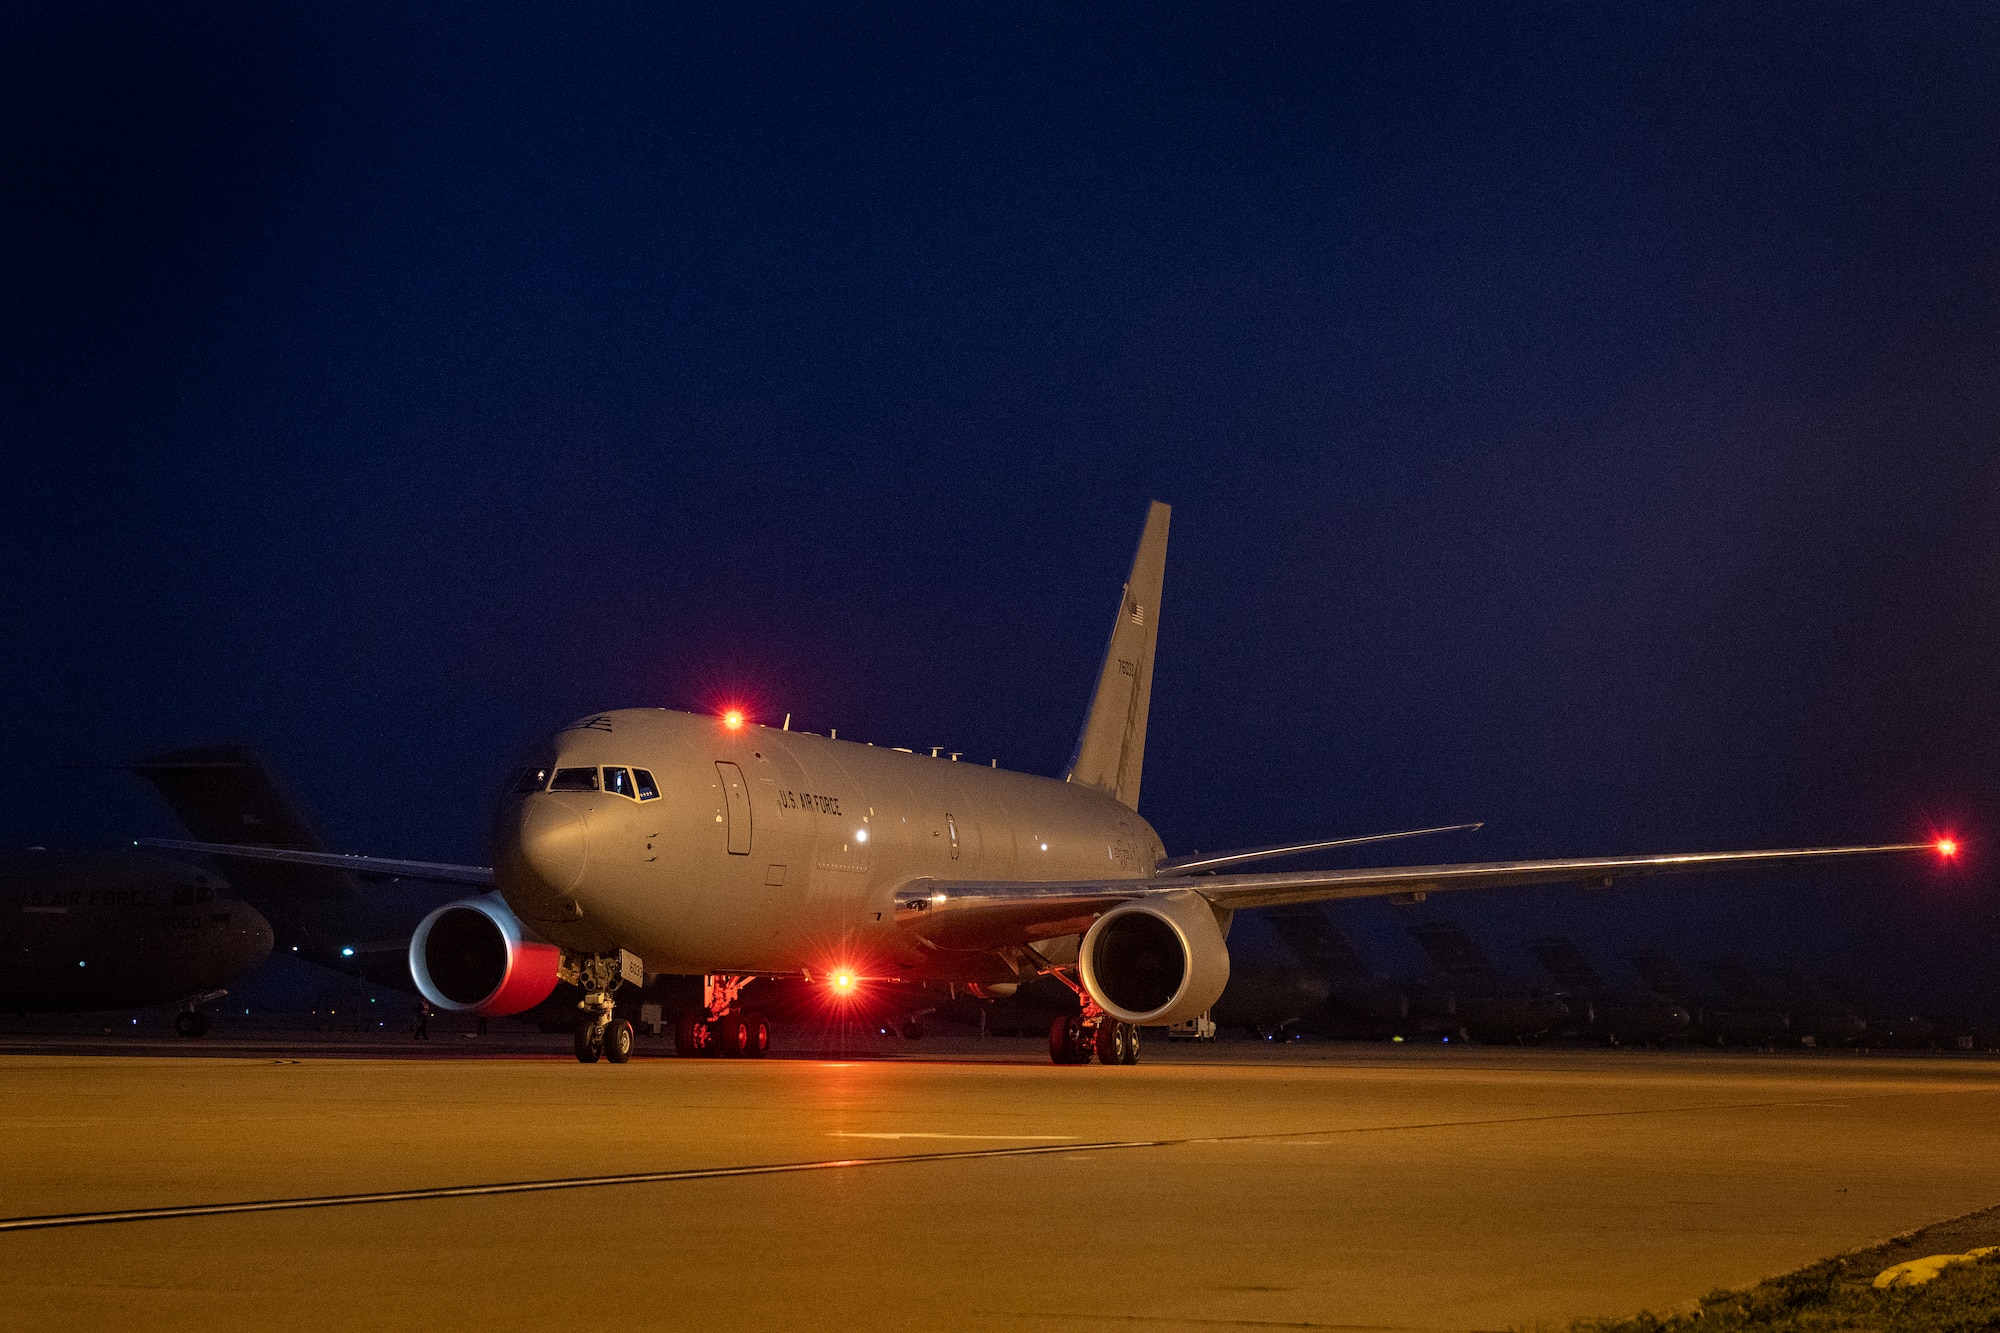 ALTUS AIR FORCE BASE, Okla. - A KC-46 Pegasus taxis on the 97th Air Mobility Wing flightline, March 11, 2019, at Altus Air Force Base, Okla.